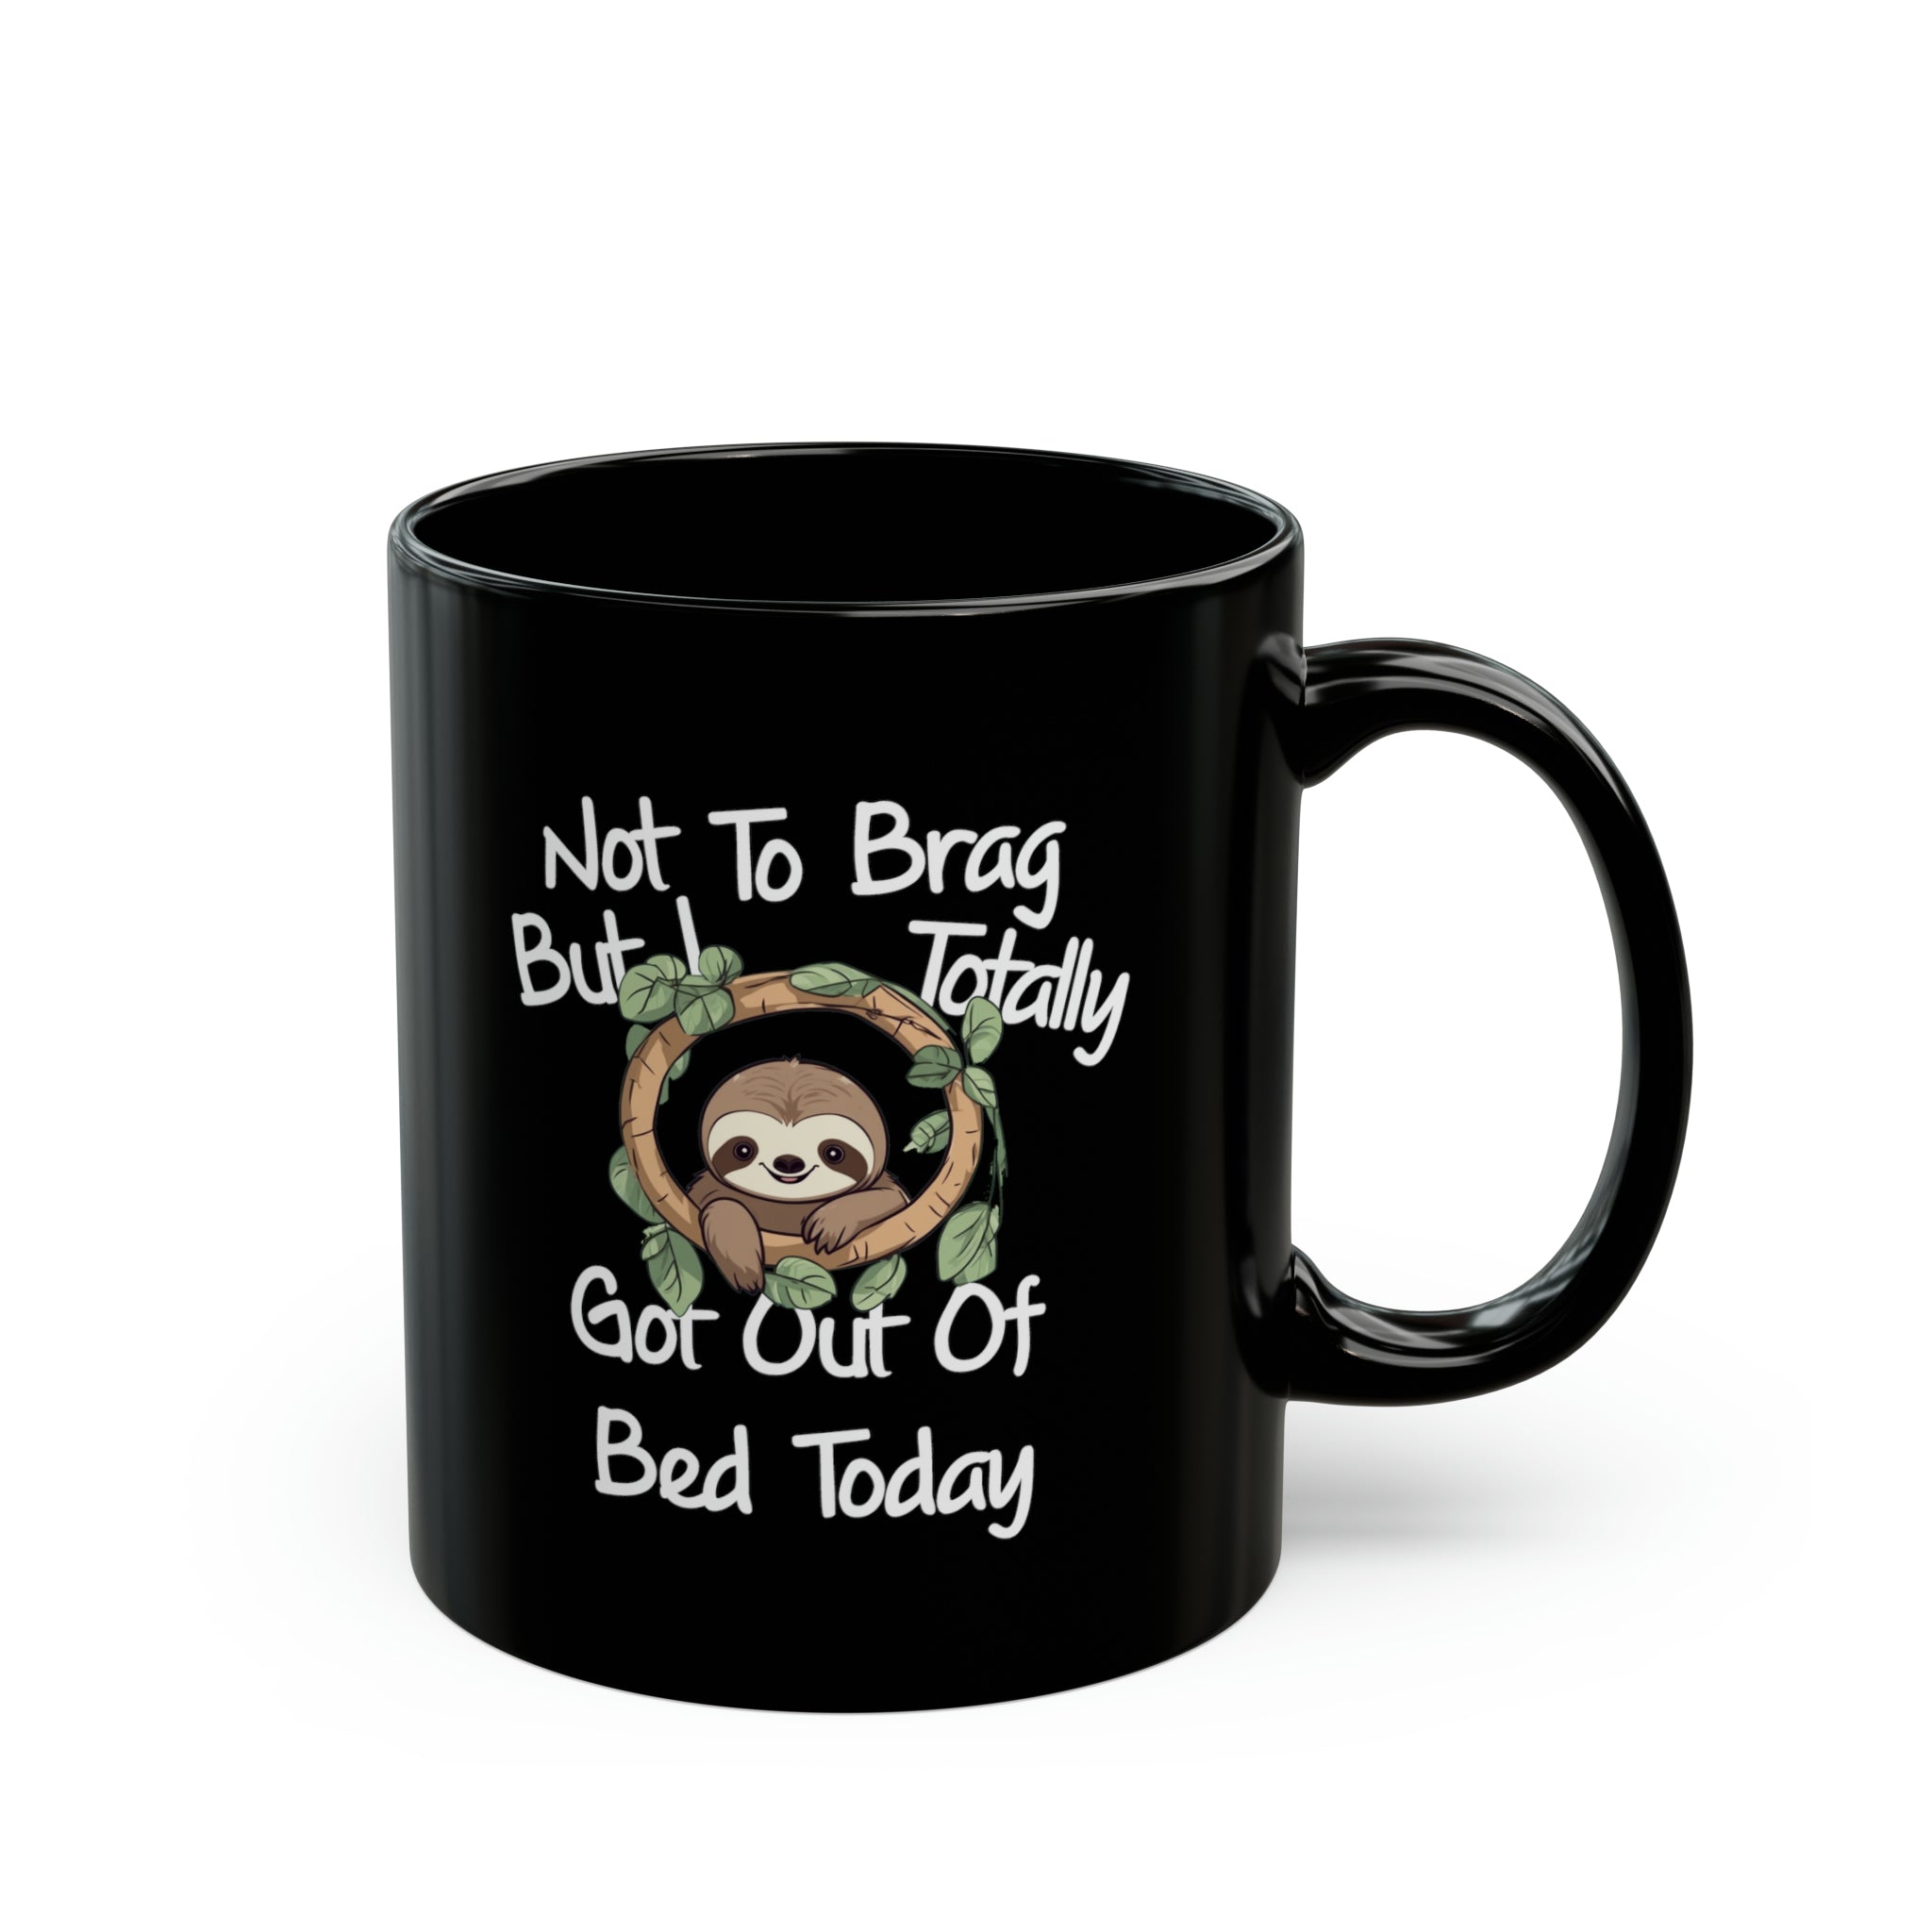 Sloth Funny Black Mug (11oz, 15oz) Not To Brag But I Totally Got Out Of Bed Today Humor Humour Joke Comedy Pun Cup Gift